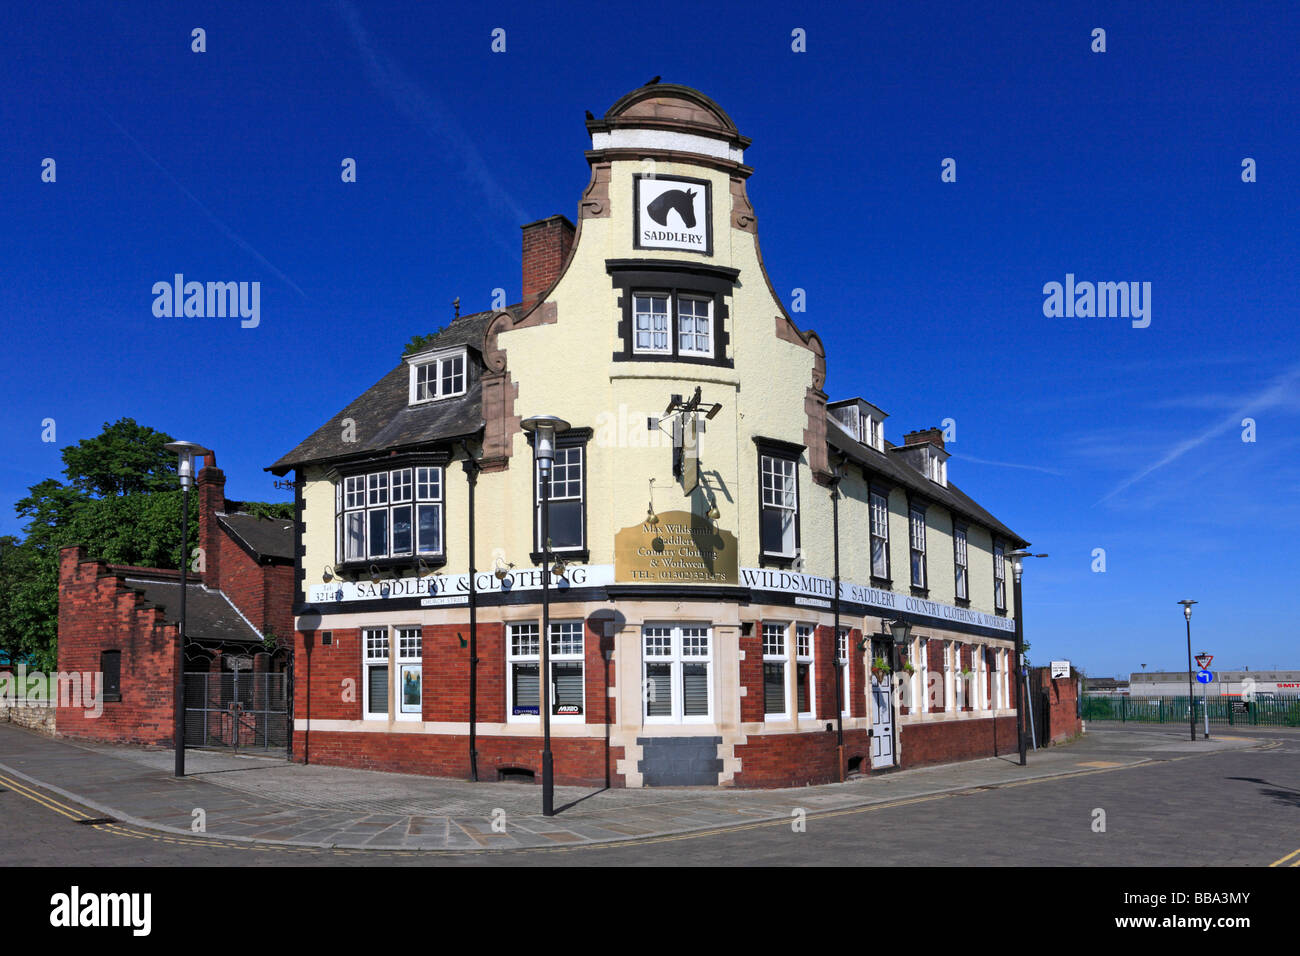 Sattlerei und Clouthing Outfitters, Doncaster, South Yorkshire, England, UK. Stockfoto